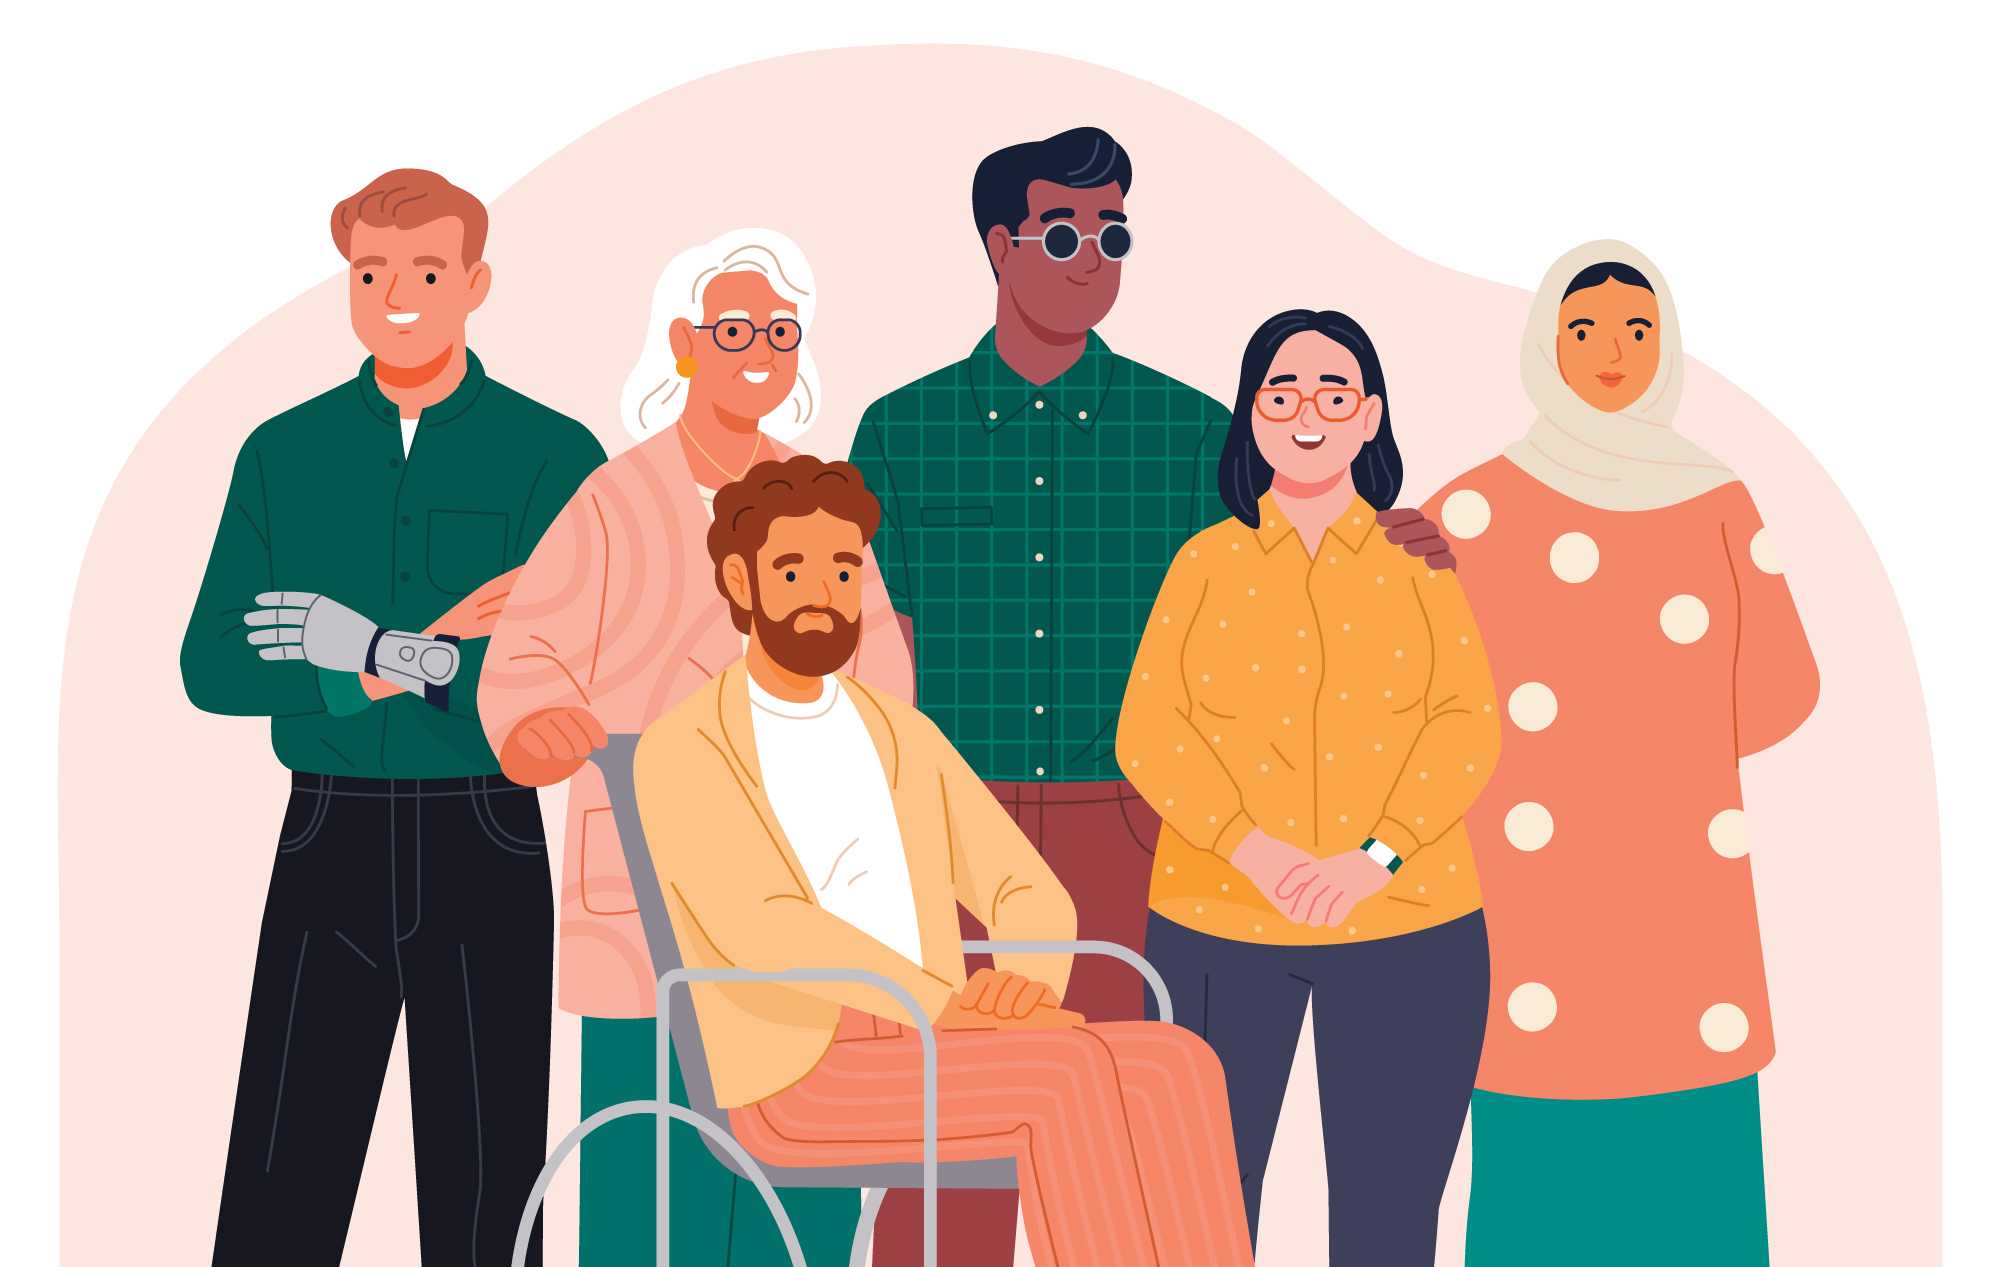 An illustration of a diverse group of people with different types of disabilities.